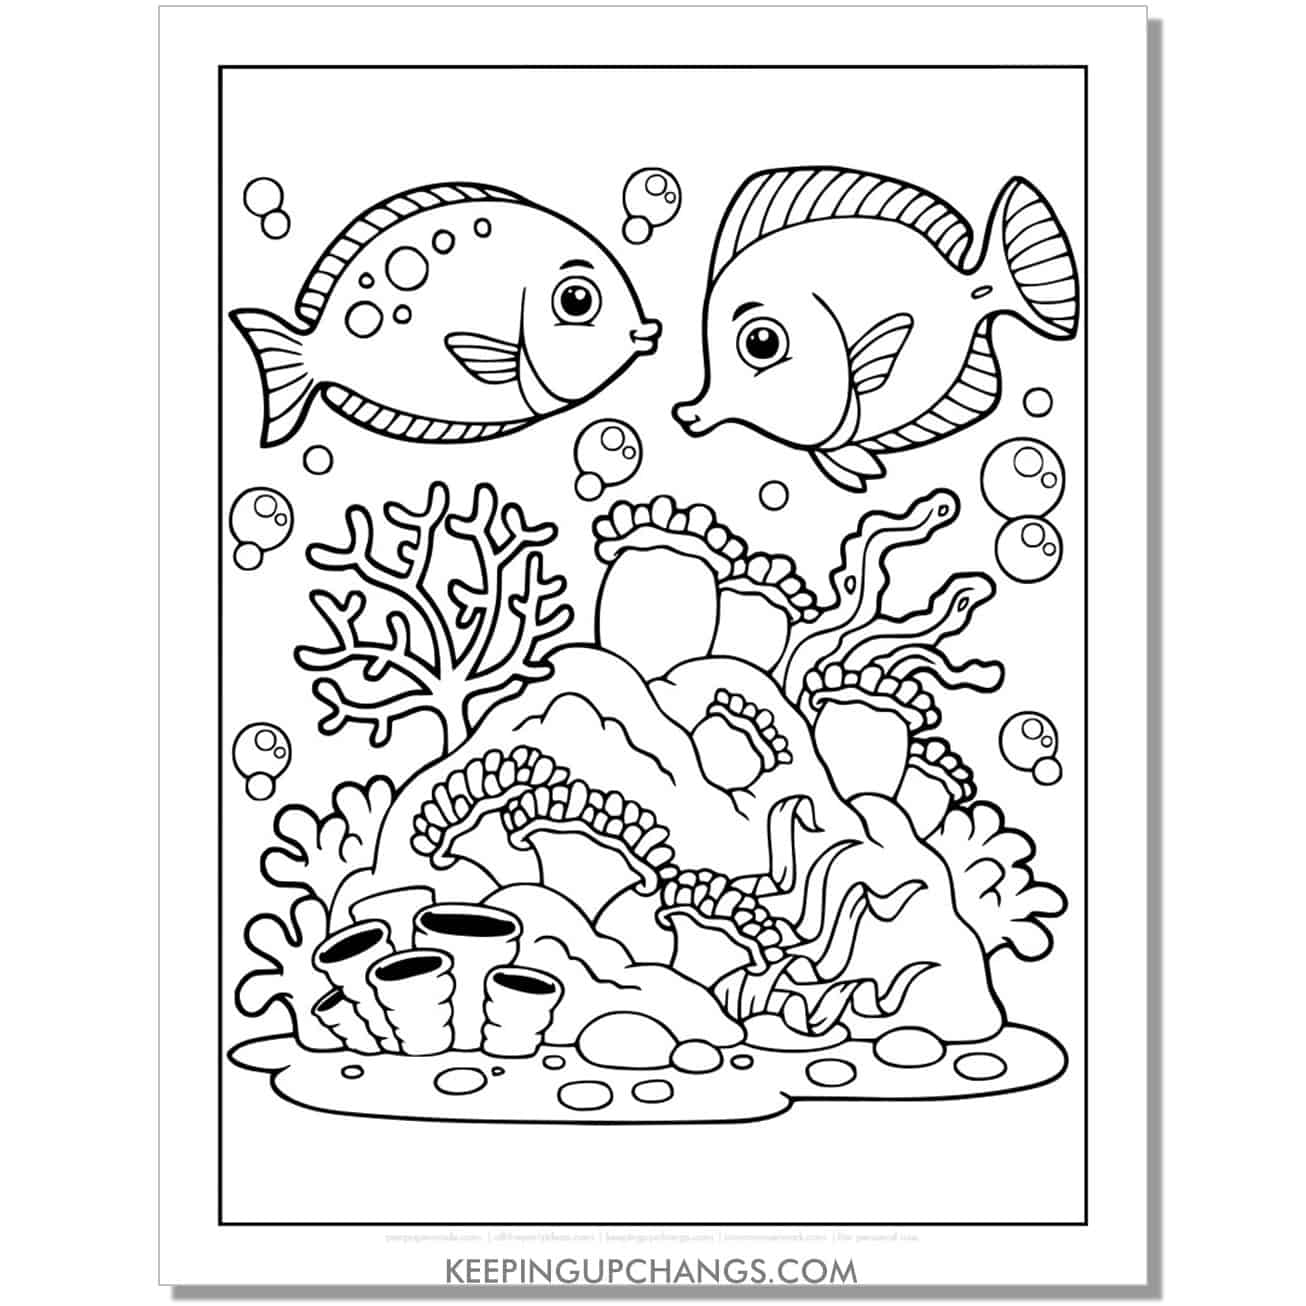 free fun full size coral reef and fish coloring page, sheet.